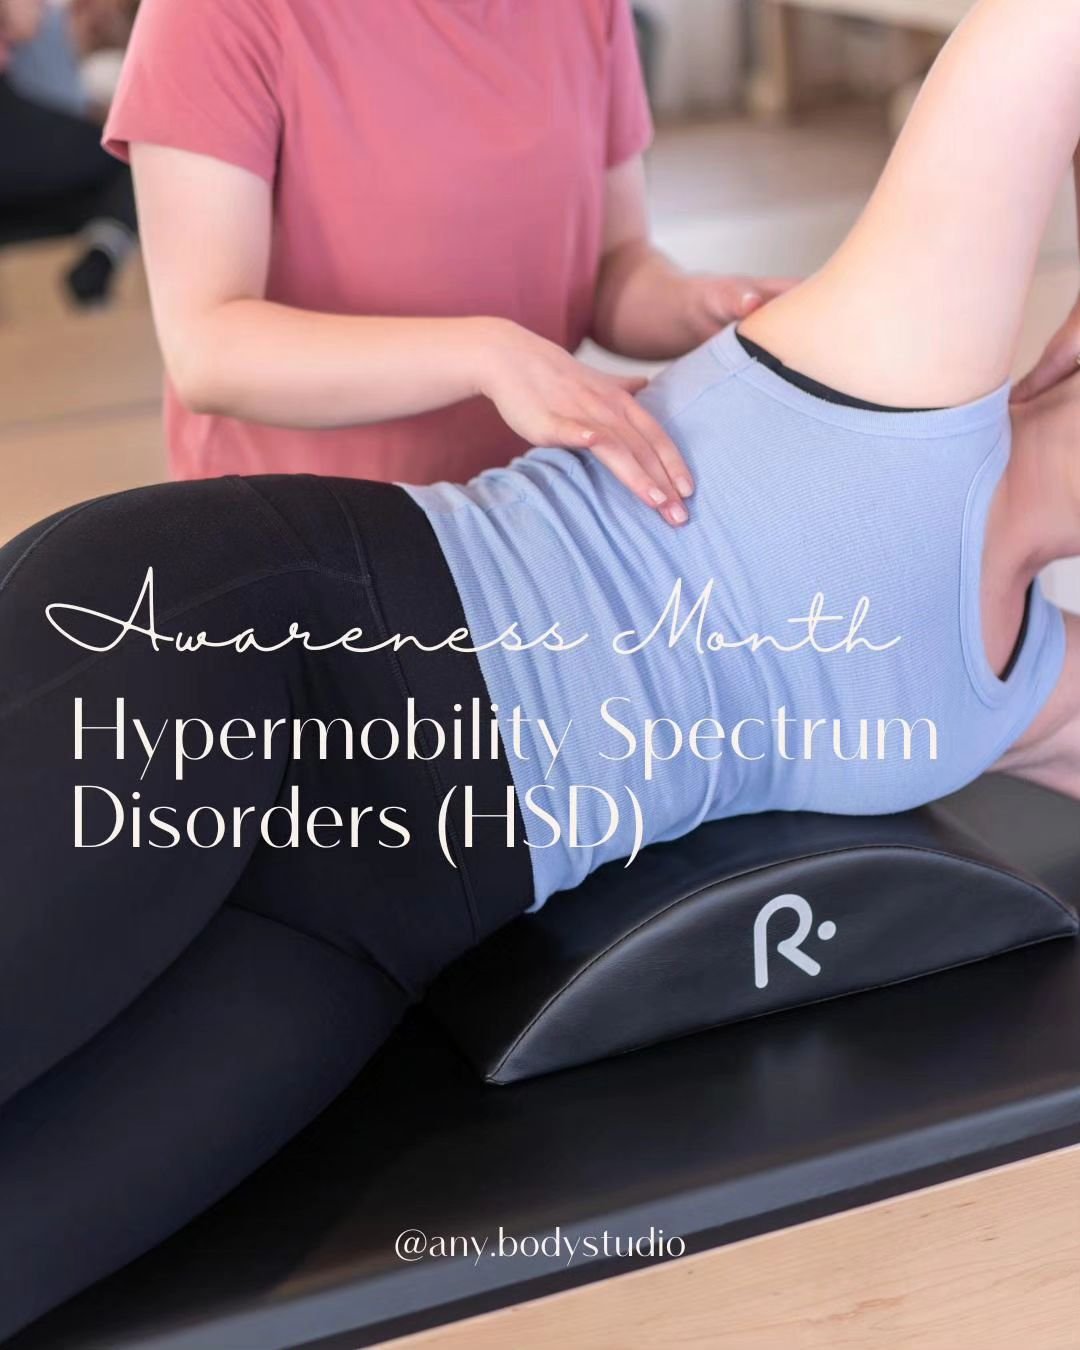 May is Hypermobility Spectrum Disoders (HSD) Awareness Month. Here at any. BODY Studio, we are extremely passionate about helping people with HSD use movement as medicine, but what is HSD?

Hypermobility spectrum disoders are connective tissue disord